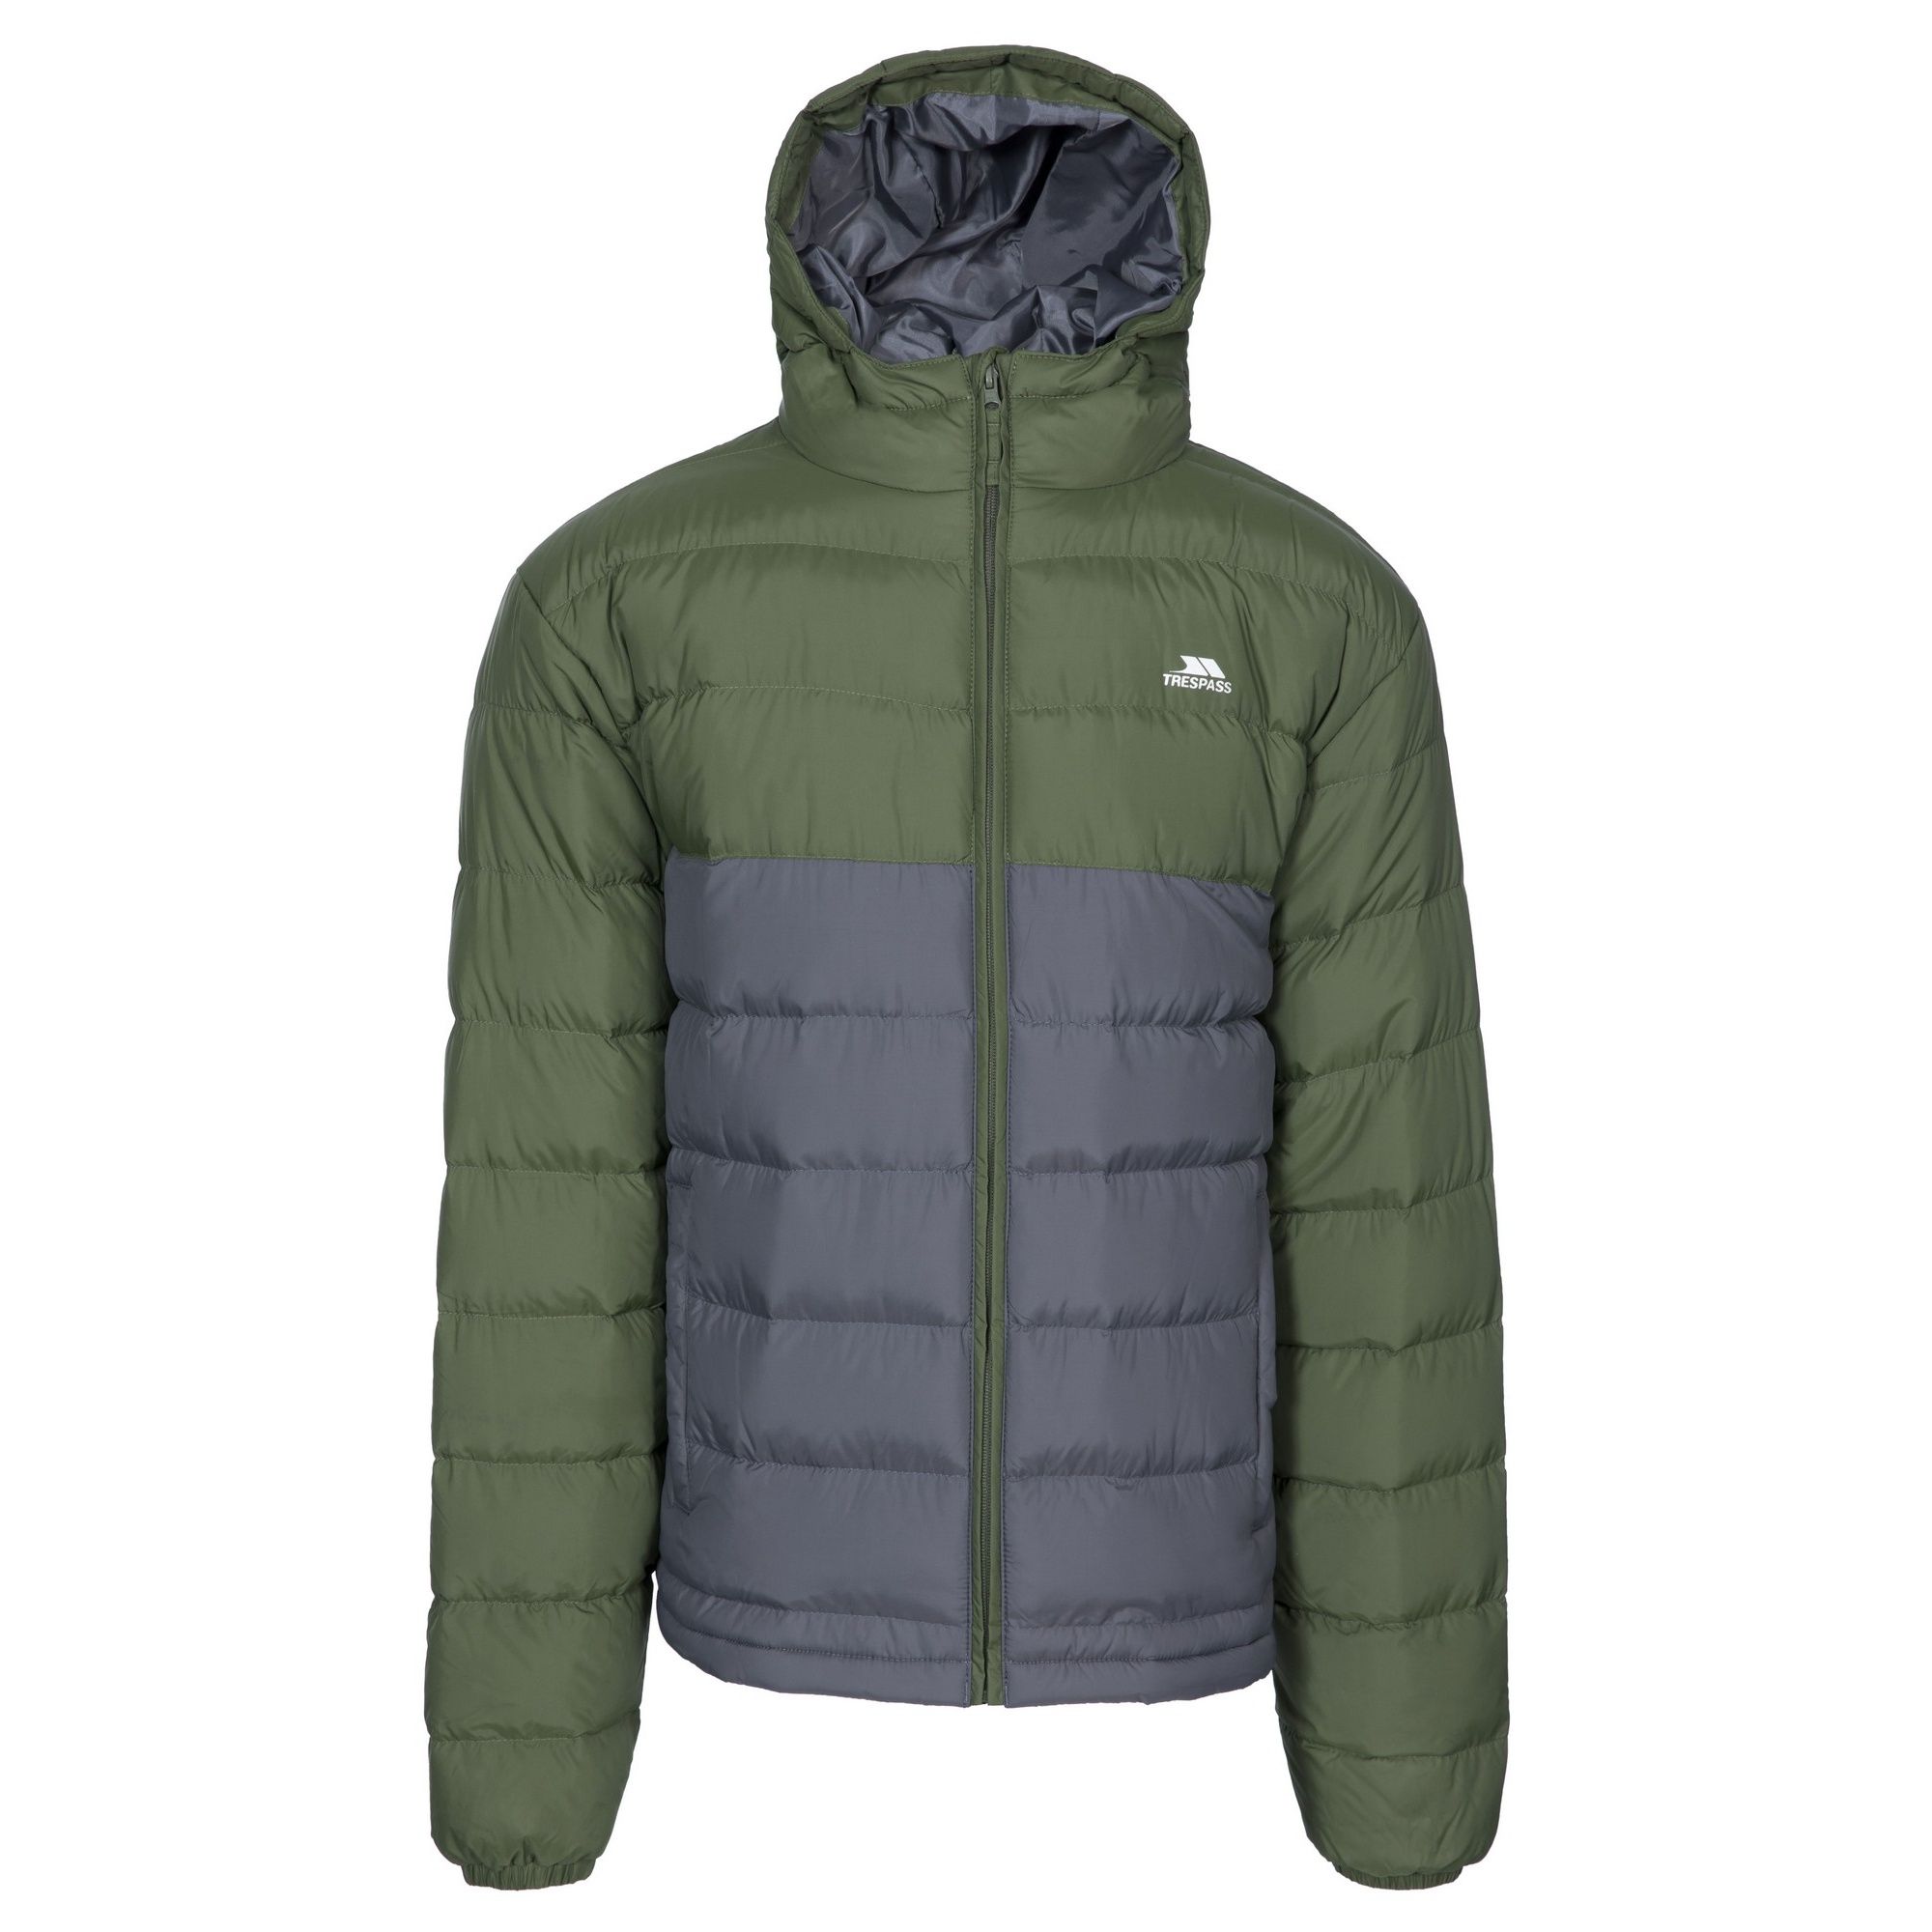 Kids quilted jacket. Grown on hood. 2 pockets. Contrast zip. Water and wind resistant. 100% polyester.